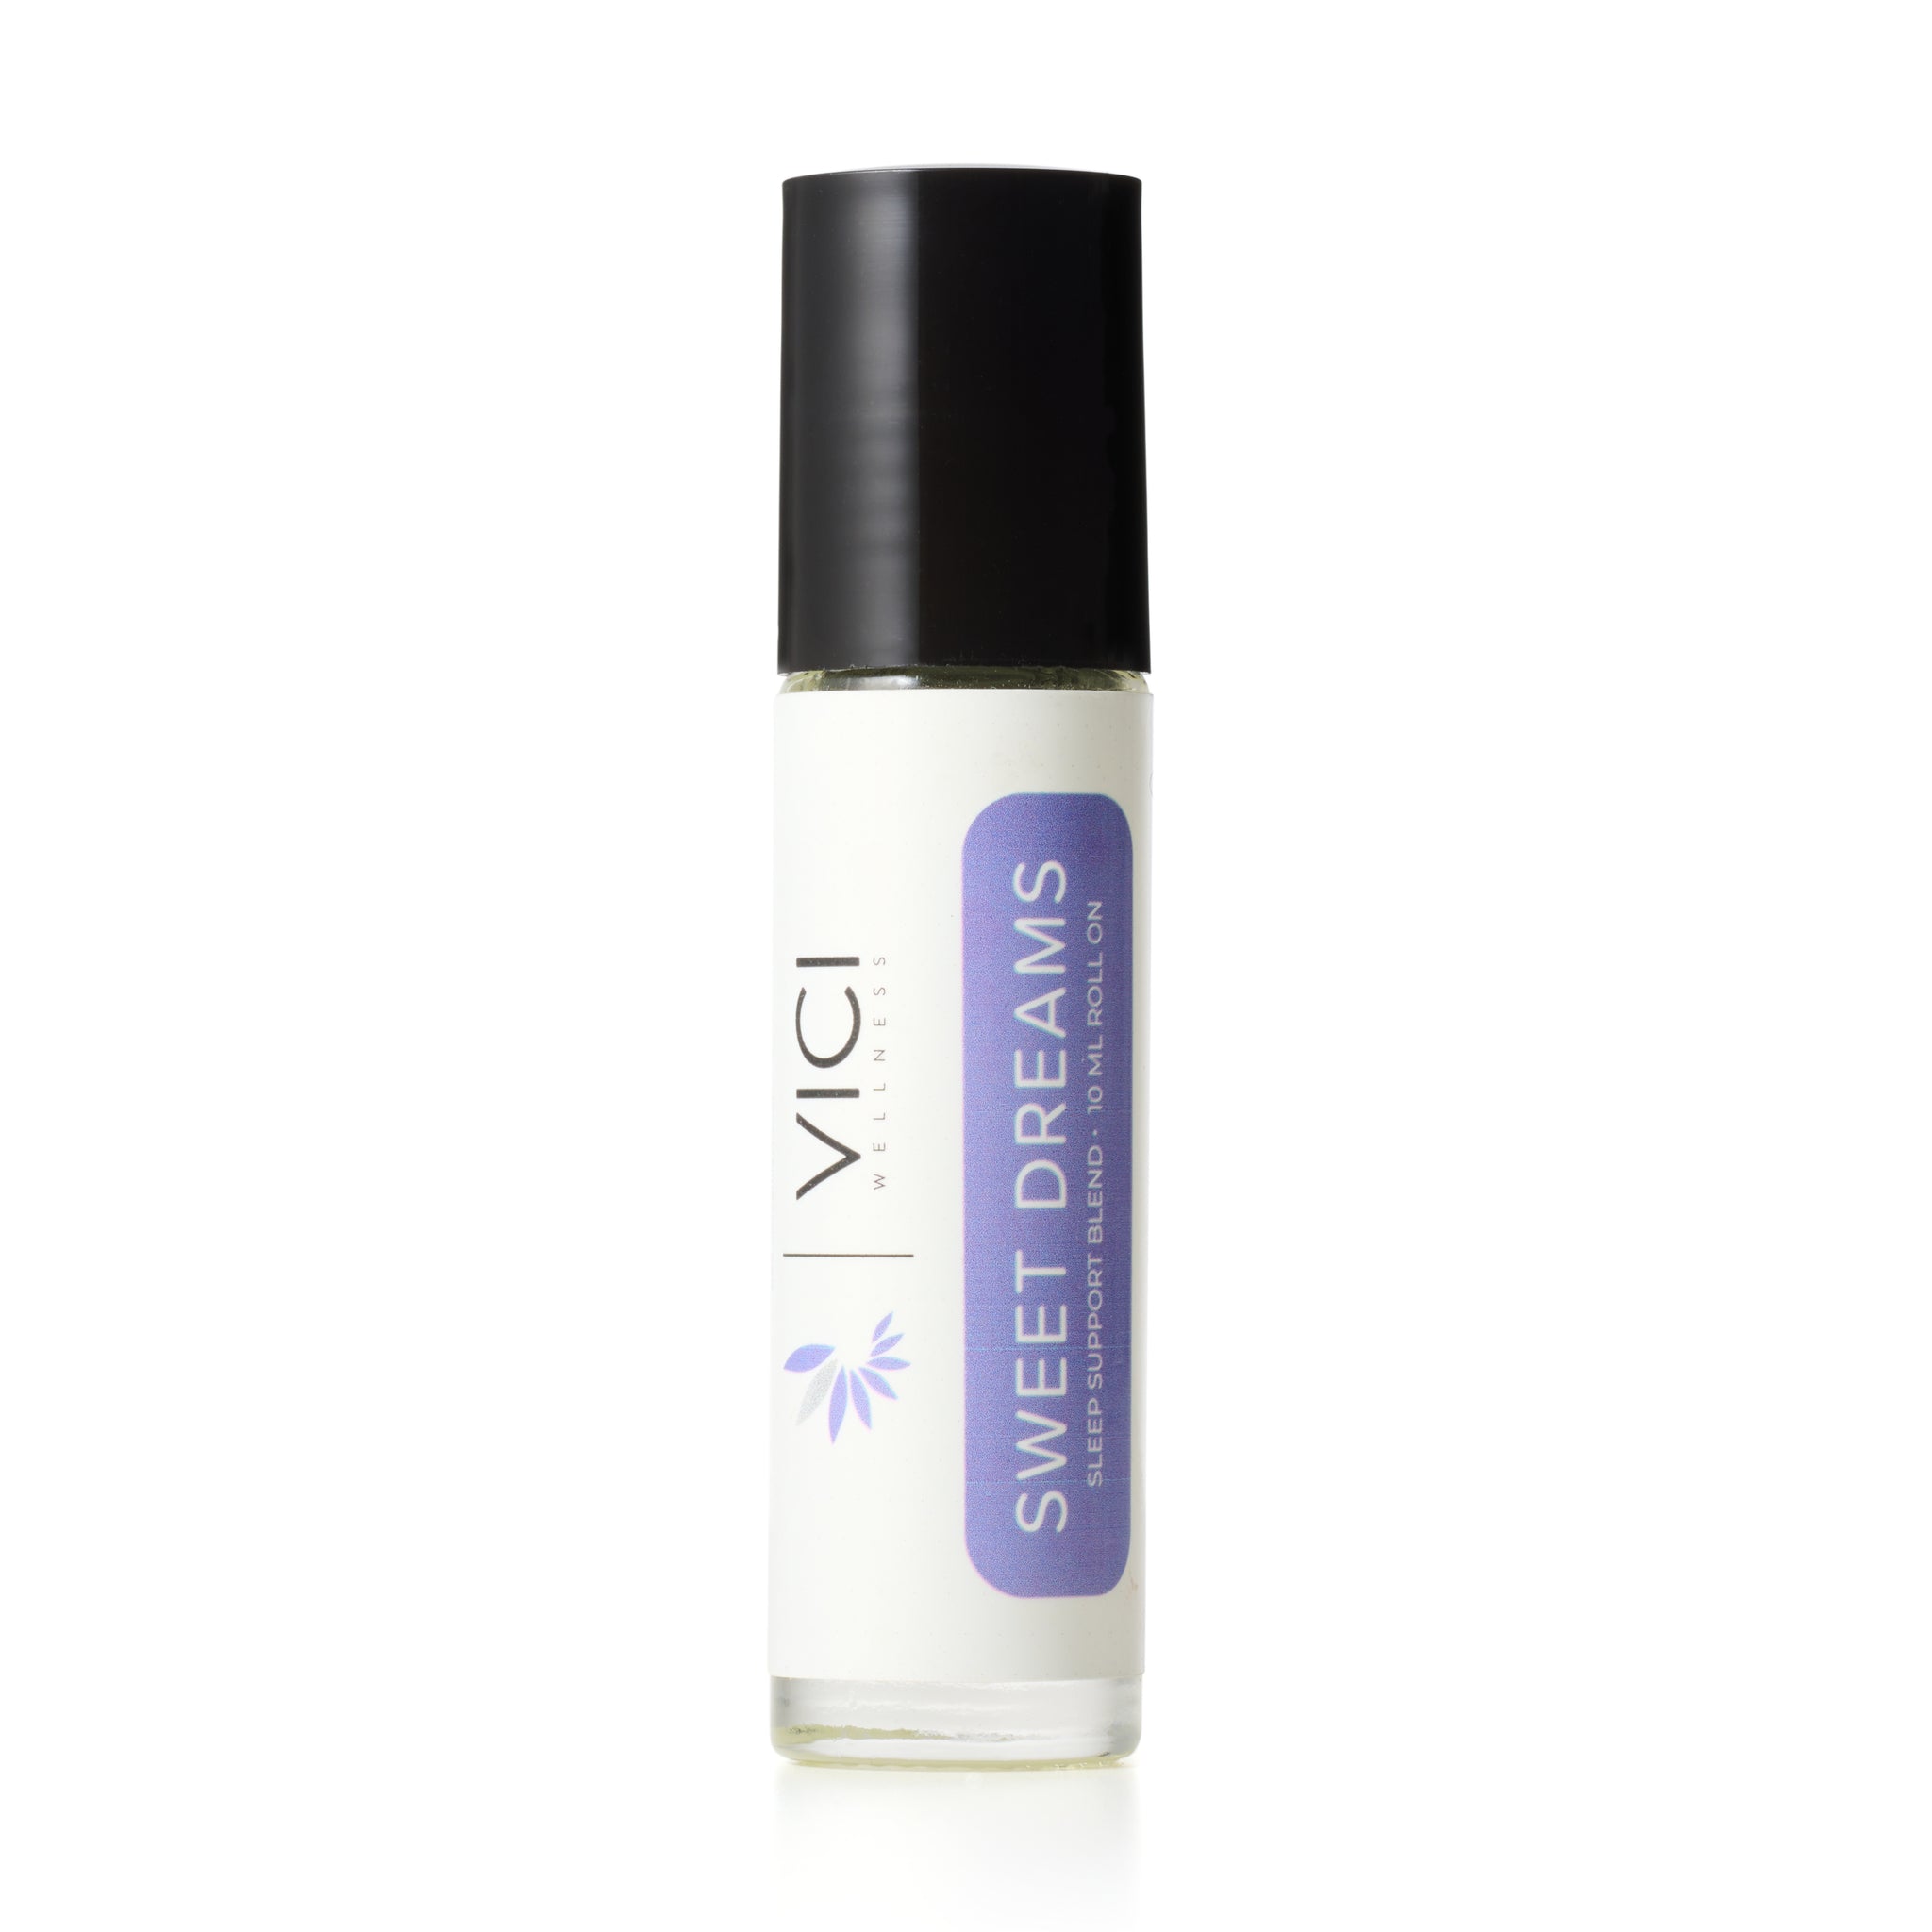 Sweet Dreams Aromatherapy Roller